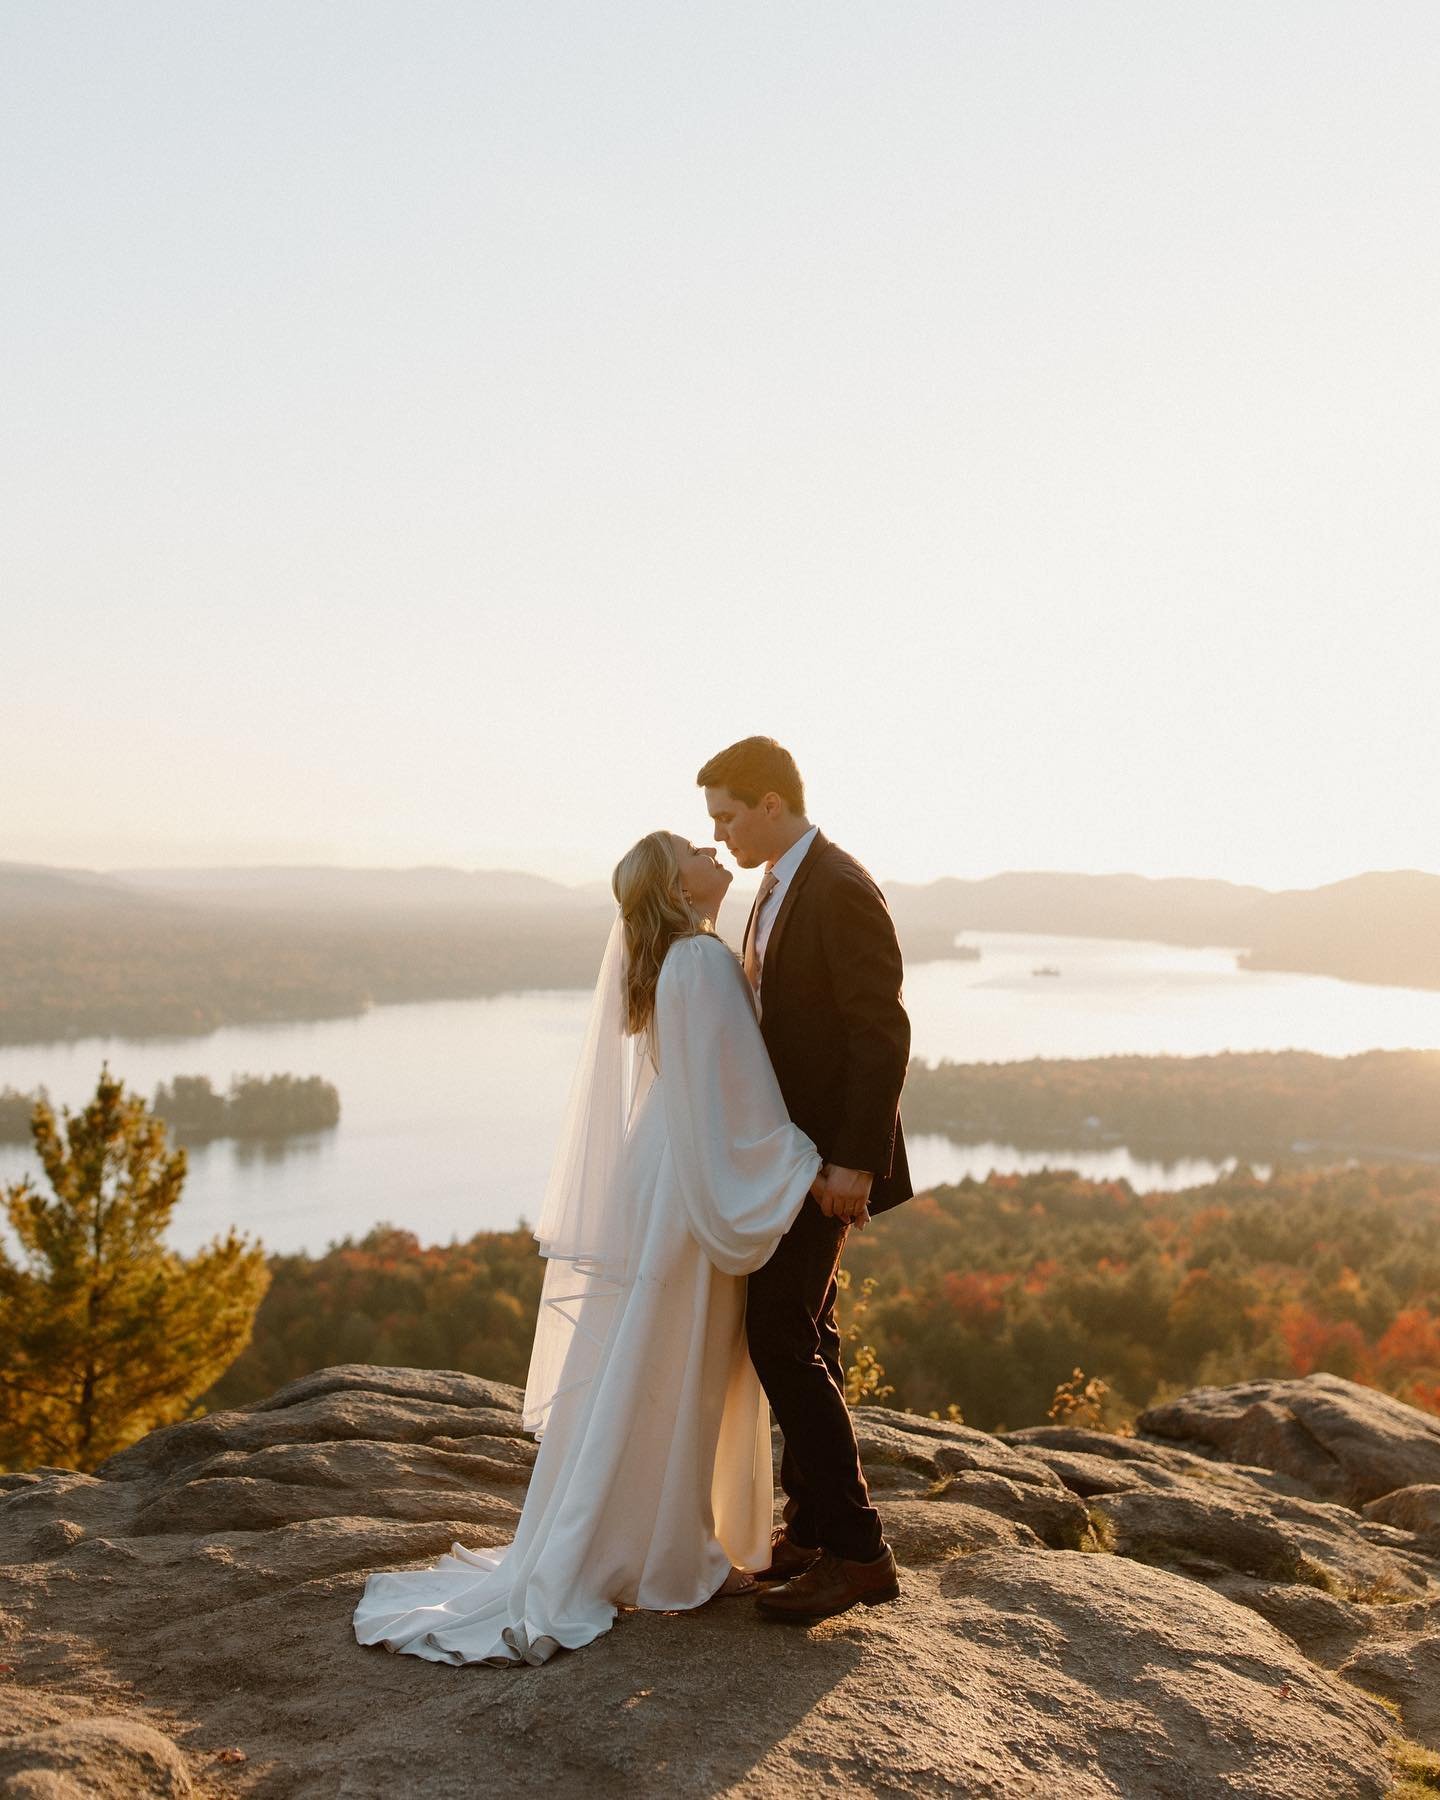 Don&rsquo;t make this mistake when planning your fall foliage elopement in the Adirondacks ⤵️

(Yes, we&rsquo;re already talking about fall!)

This is the number one mistake I see couples make when they start planning their fall foliage elopement in 